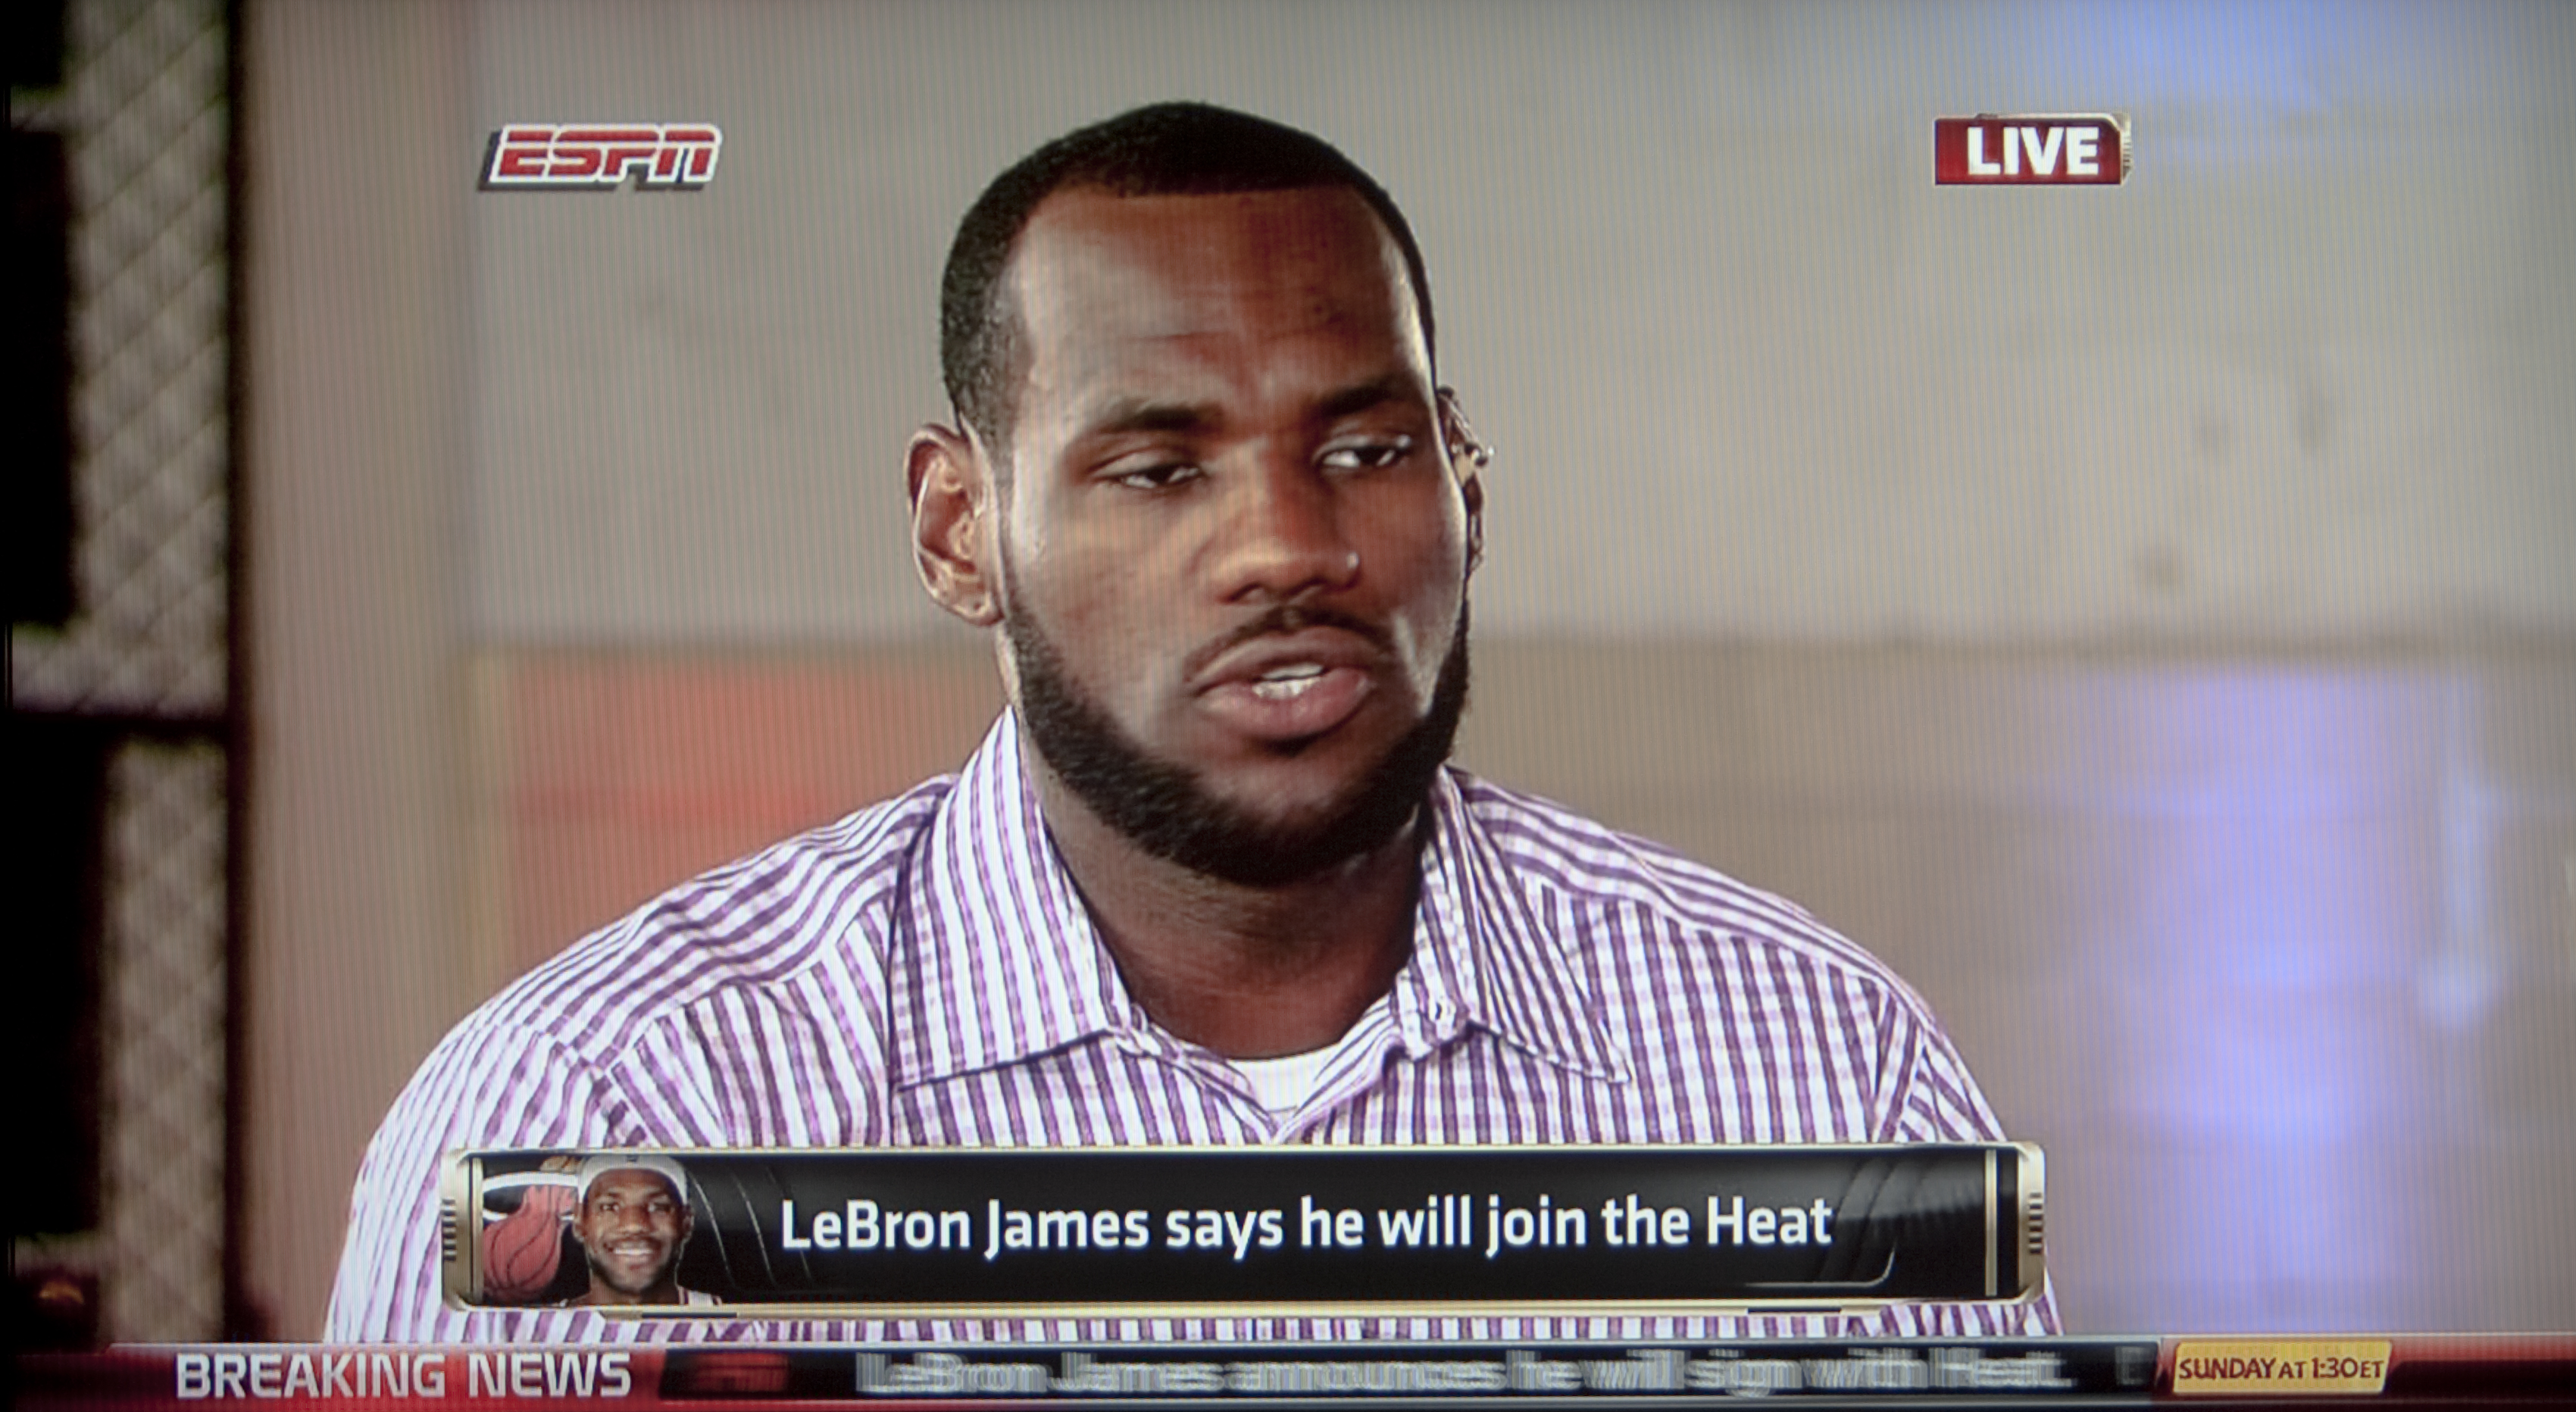 Cavs will be patient with LeBron - ESPN